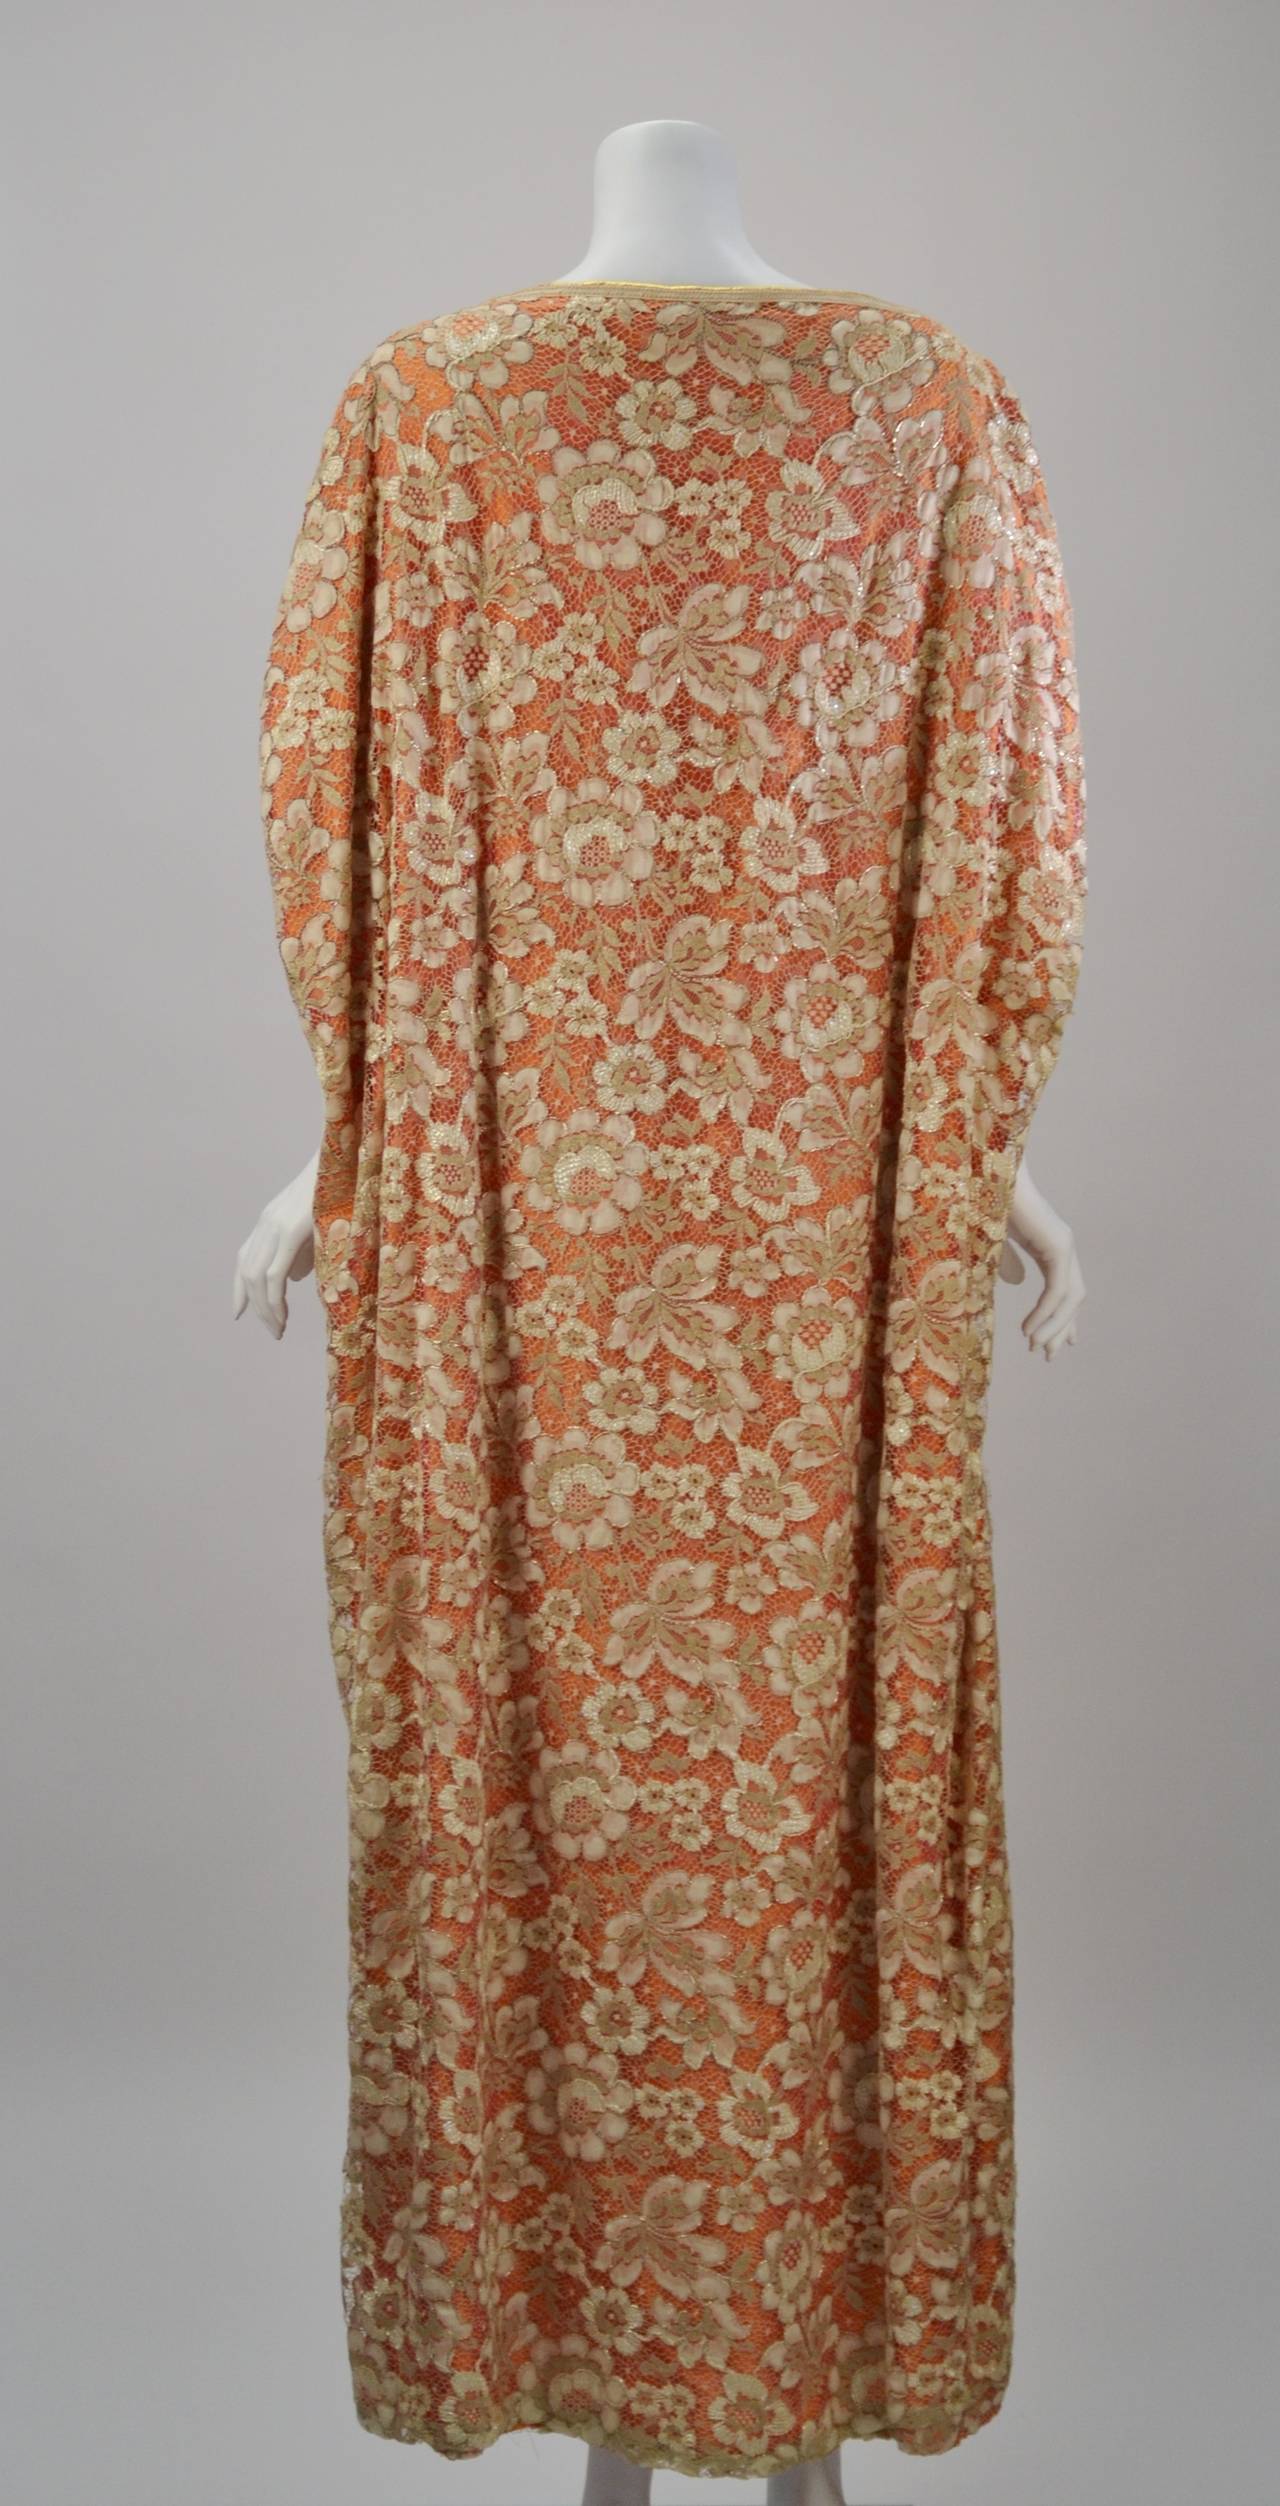 Extravagant late 70's Neiman Marcus coral raw silk with off-white lace overlay caftan gown. The gown features dolman sleeves, sashes that tie in front to create a waist and a cape-like silhouette in back. Intricate gold threading/trim is throughout